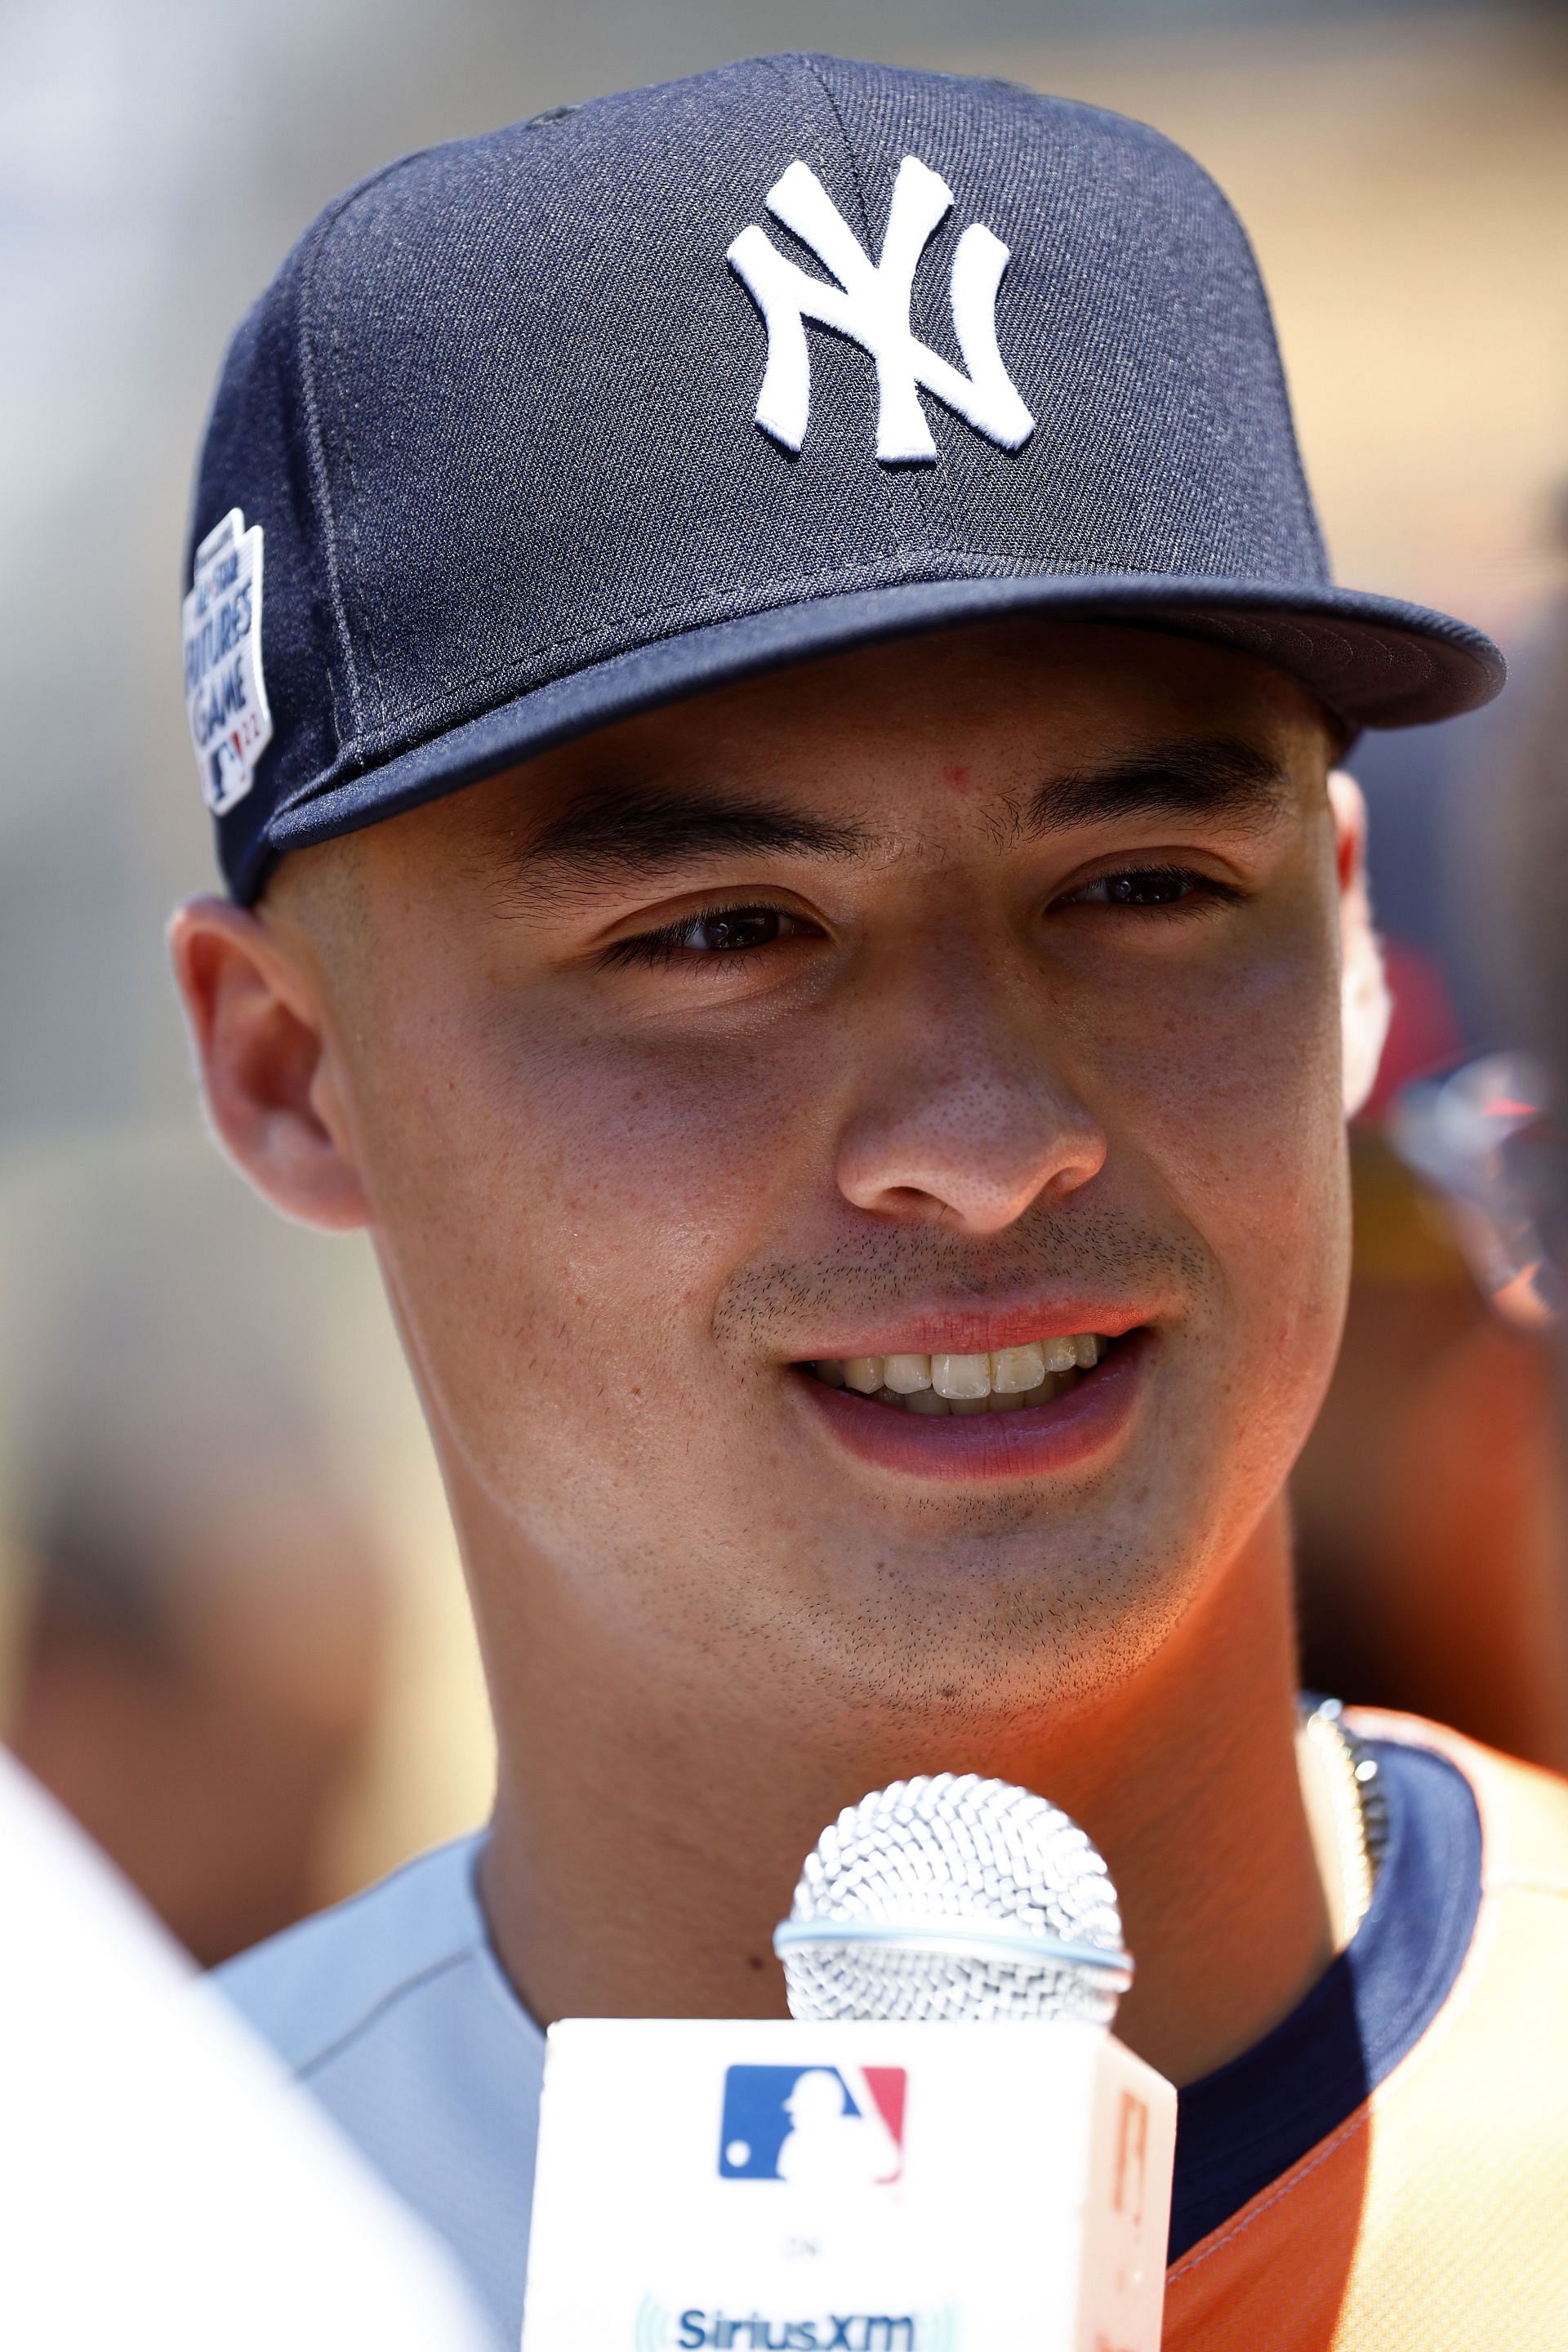 Is Anthony Volpe Going To Be A Star Shortstop Like Jeter?